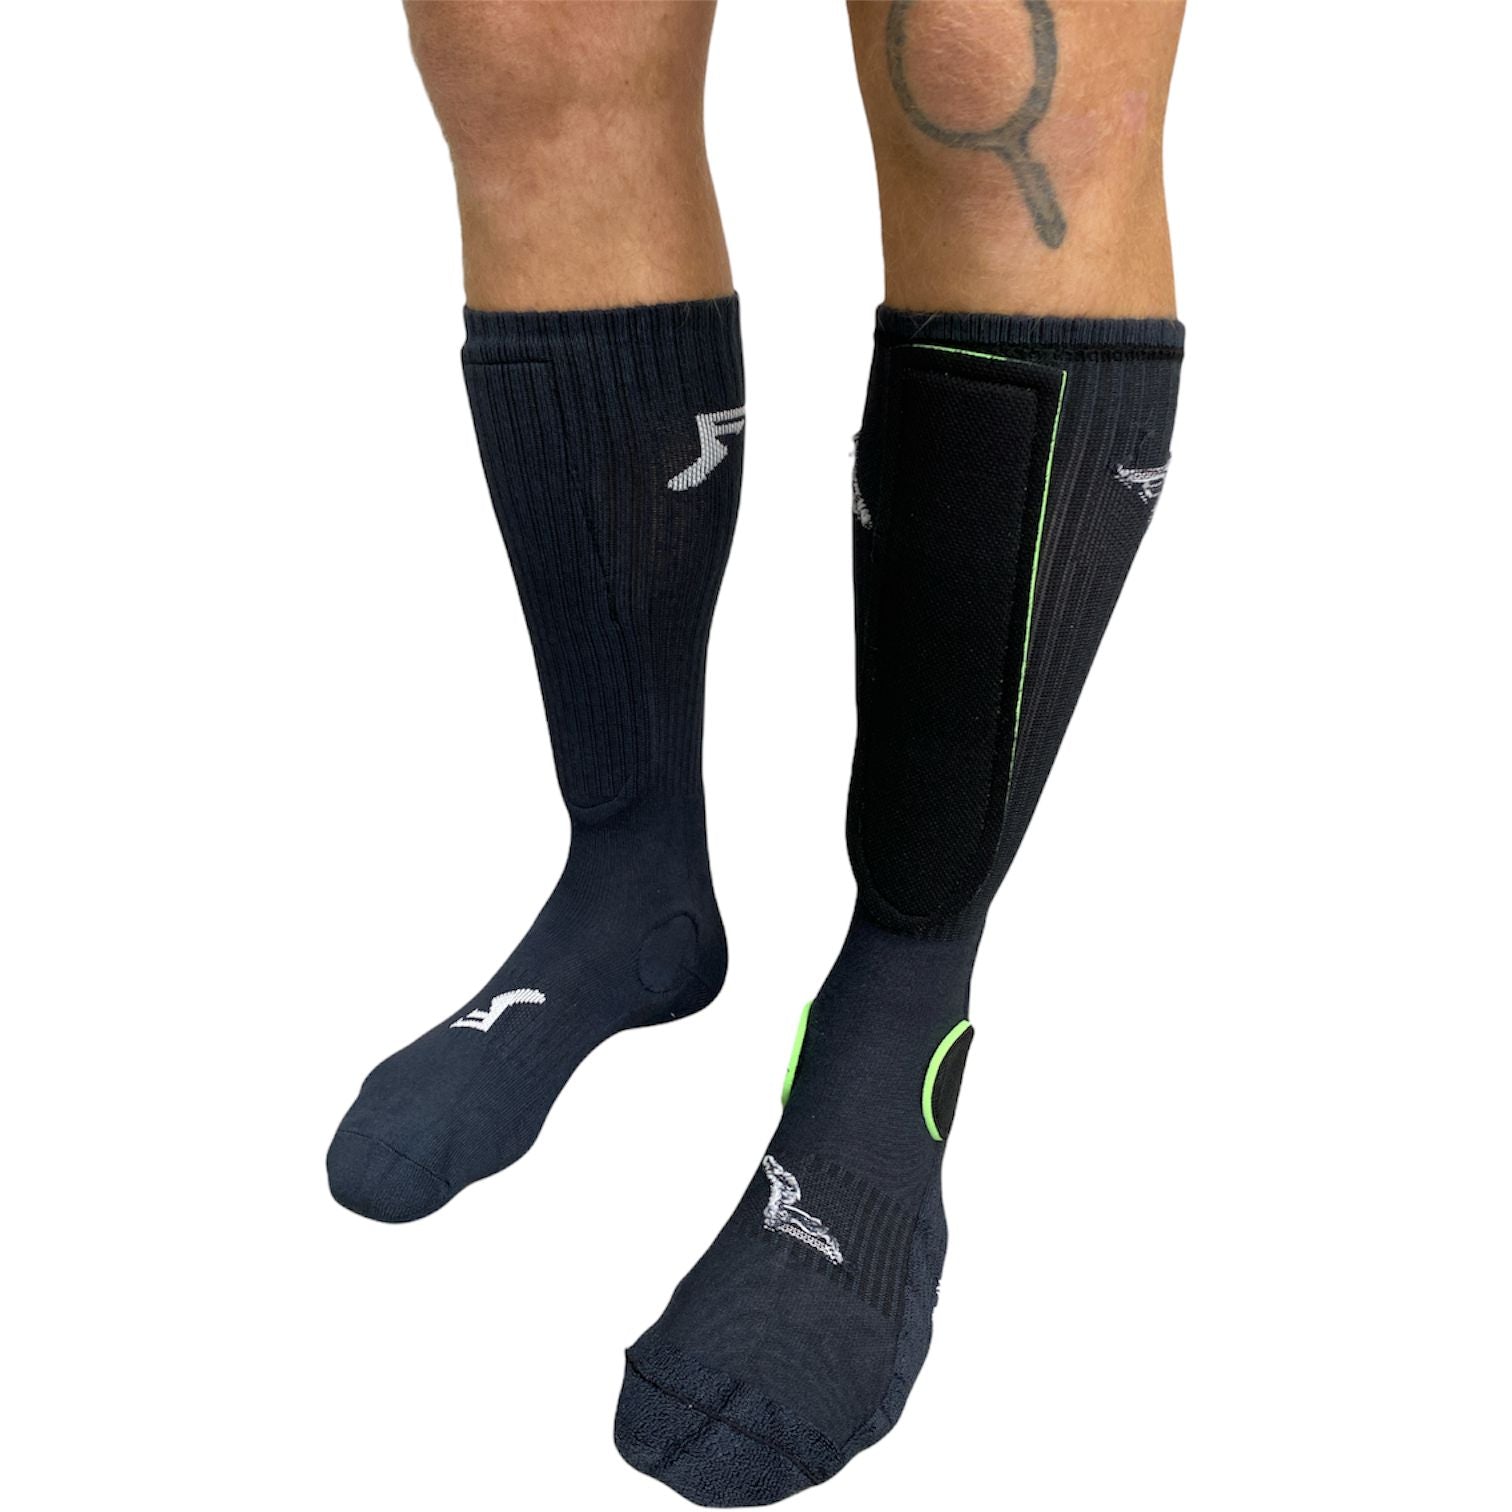 Person's legs wearing FP Painkiller Socks Crew Cut crafted from mildew-resistant bamboo fabric; the right sock includes a black shin guard.